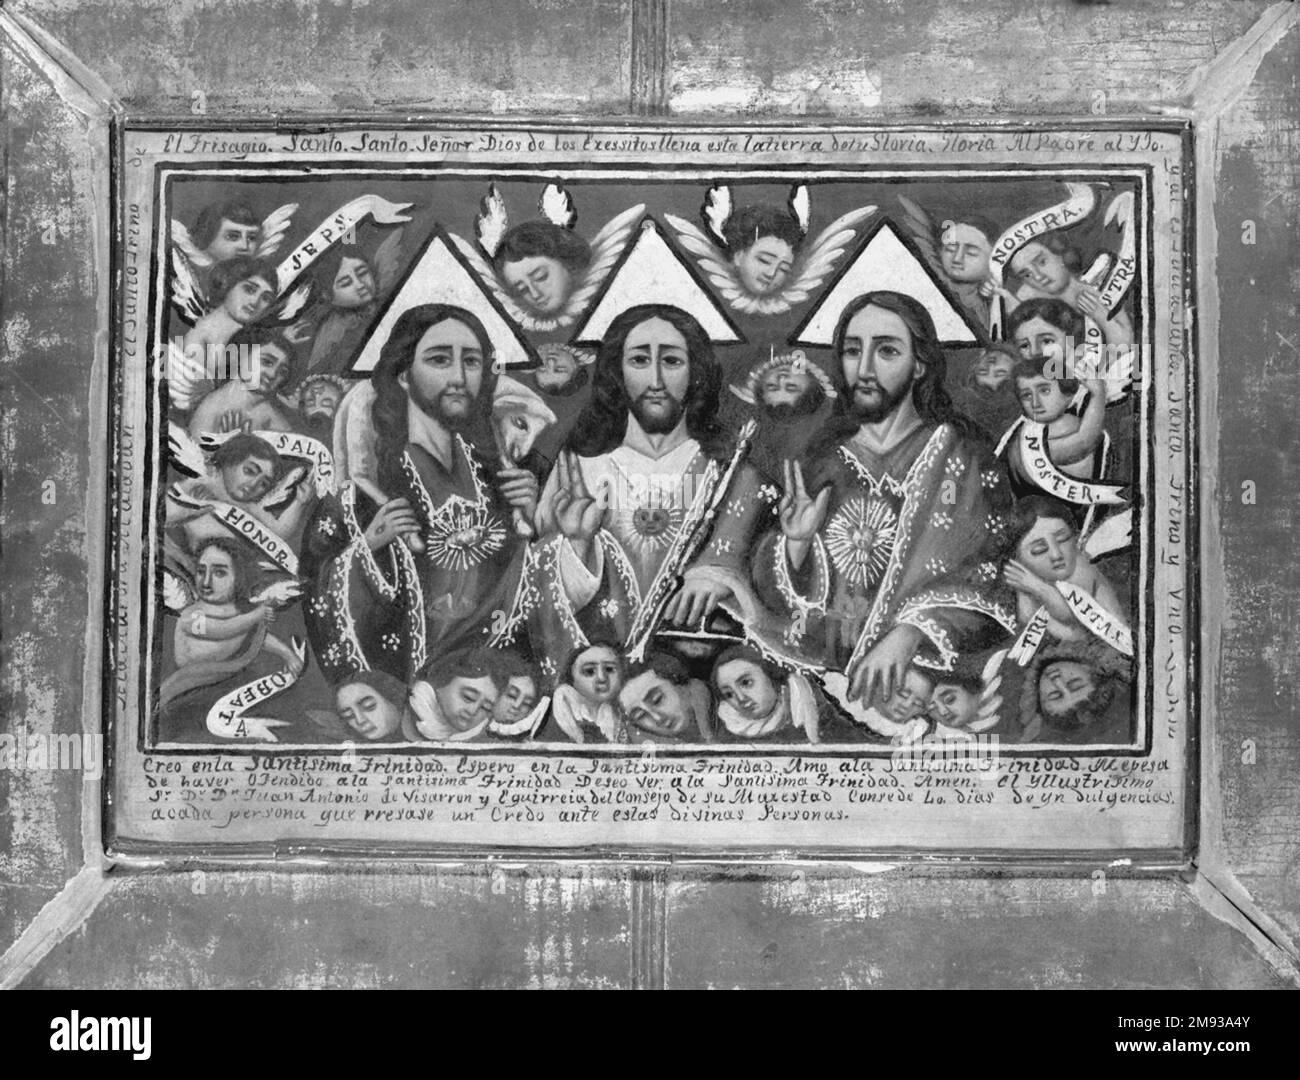 Trinity Unknown. , early 19th century. Painting on tin, 12 1/2 x 16 1/4 in. (31.8 x 41.3 cm).   American Art early 19th century Stock Photo